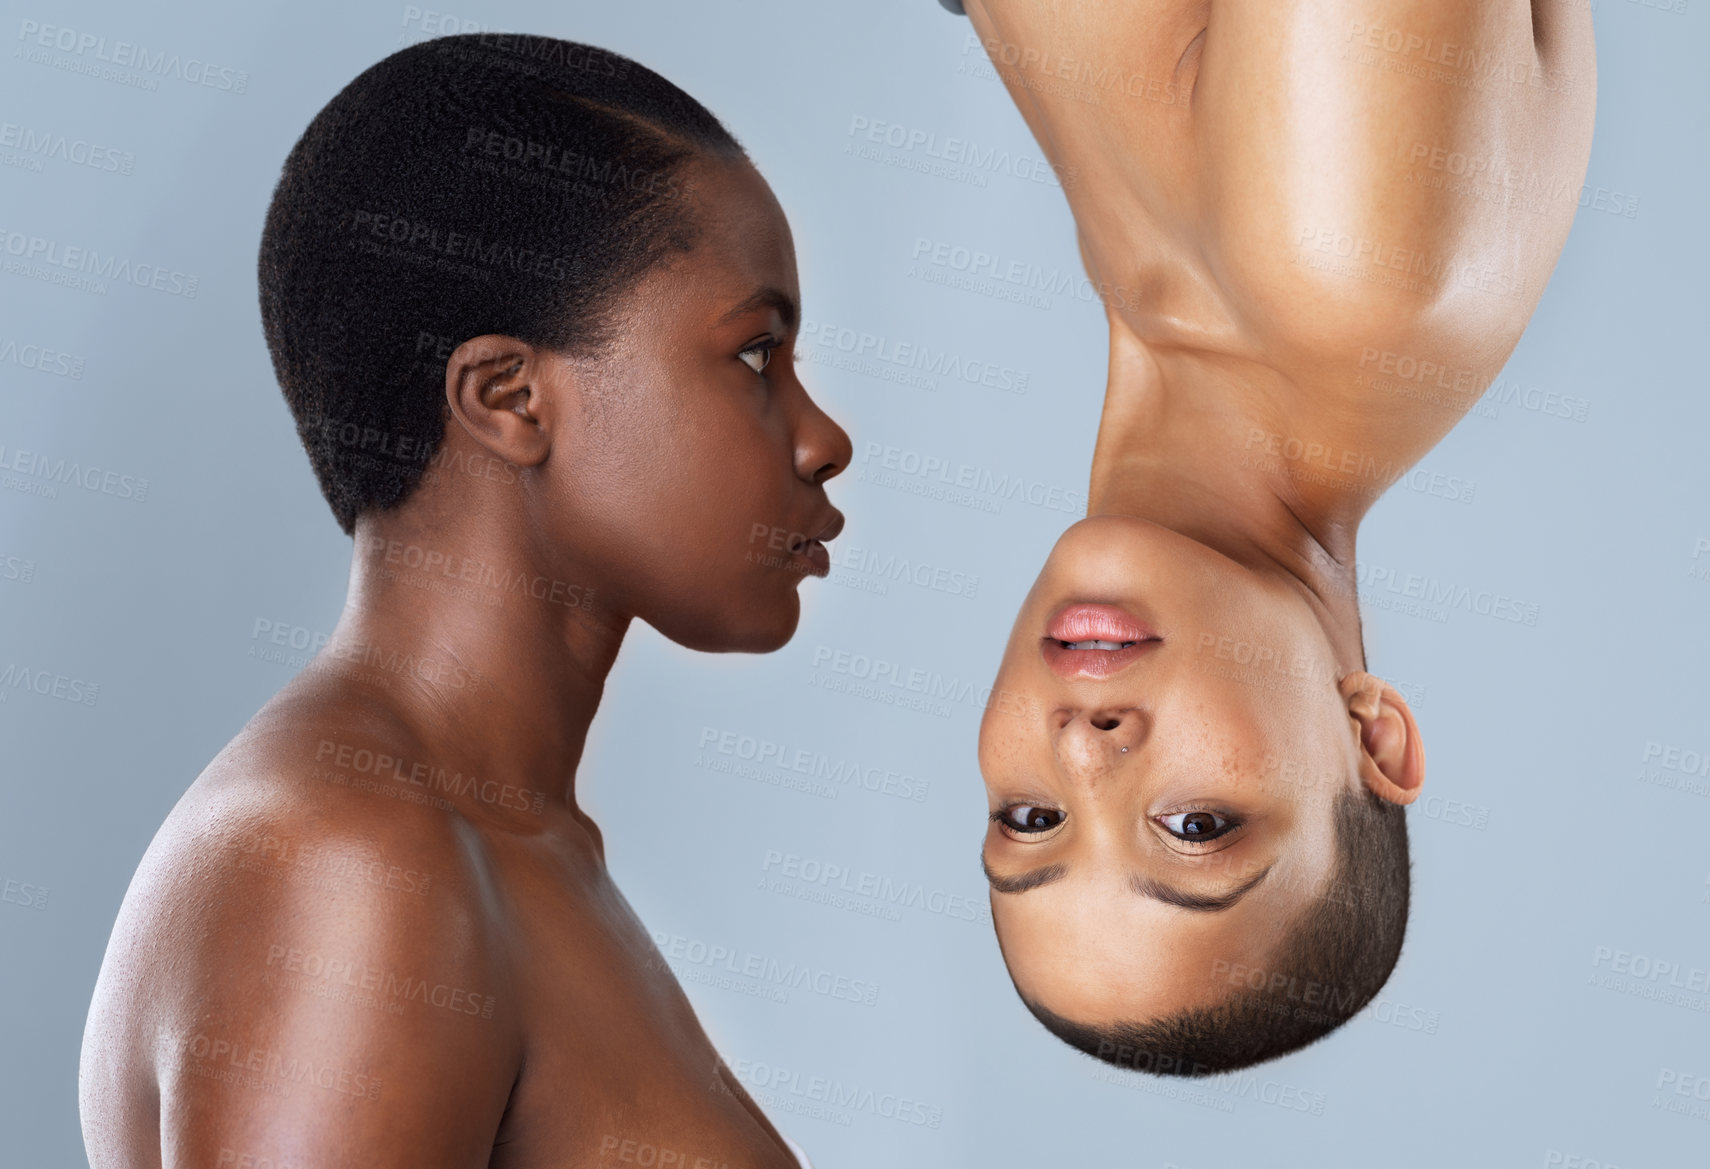 Buy stock photo Portrait of two beautiful young women standing close  to each other with one upside down against a grey background